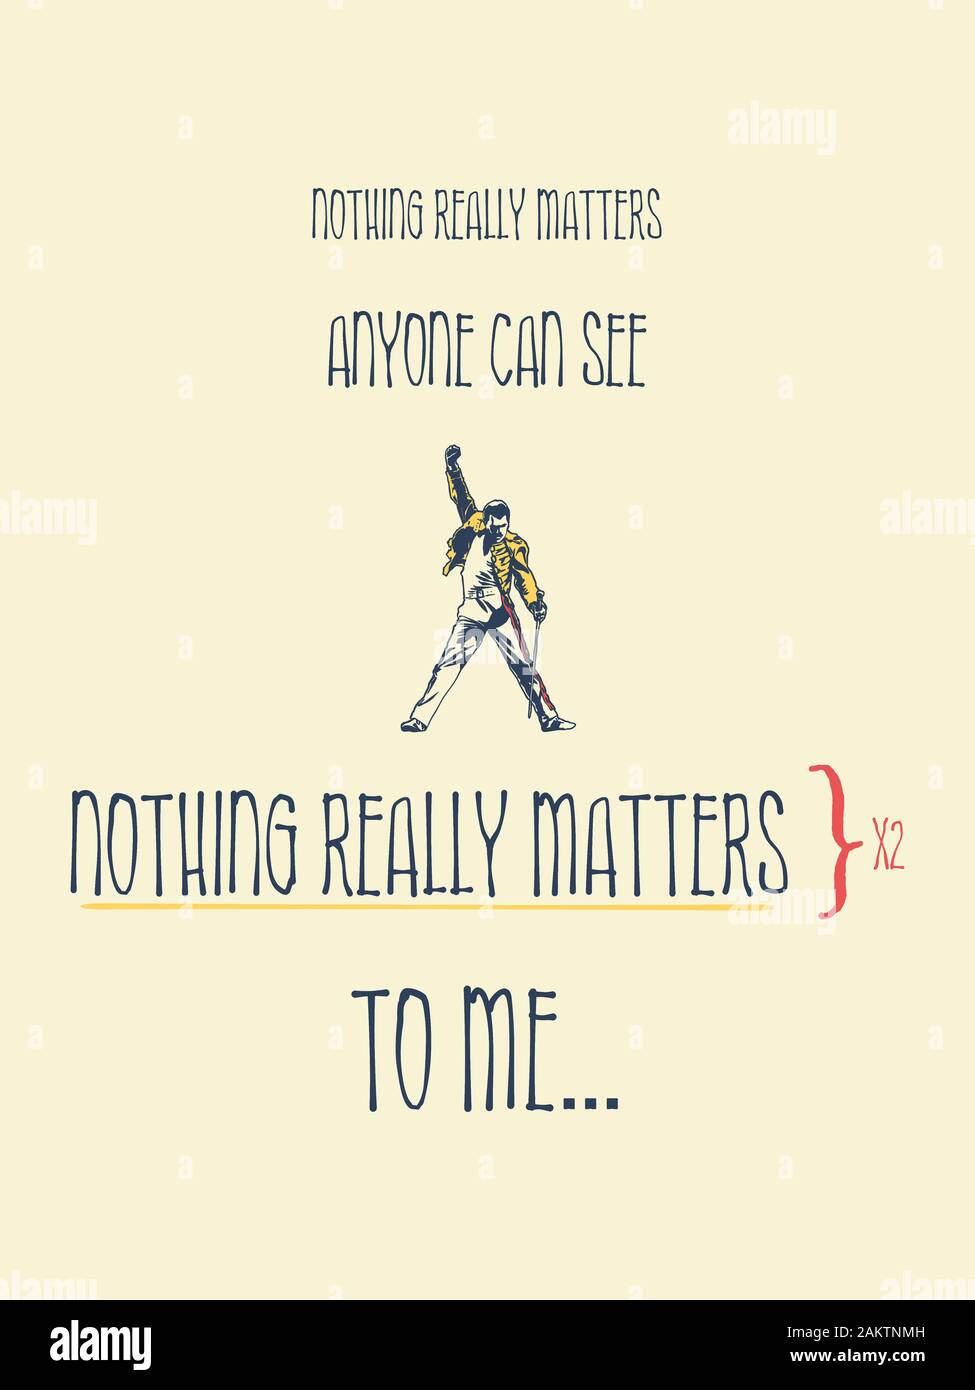 Nothing really matters to me, minimalistic text illustration inspired by  the lyrics of Bohemian Rhapsody, Queen. Freddie Mercury yellow jacket  perform Stock Photo - Alamy